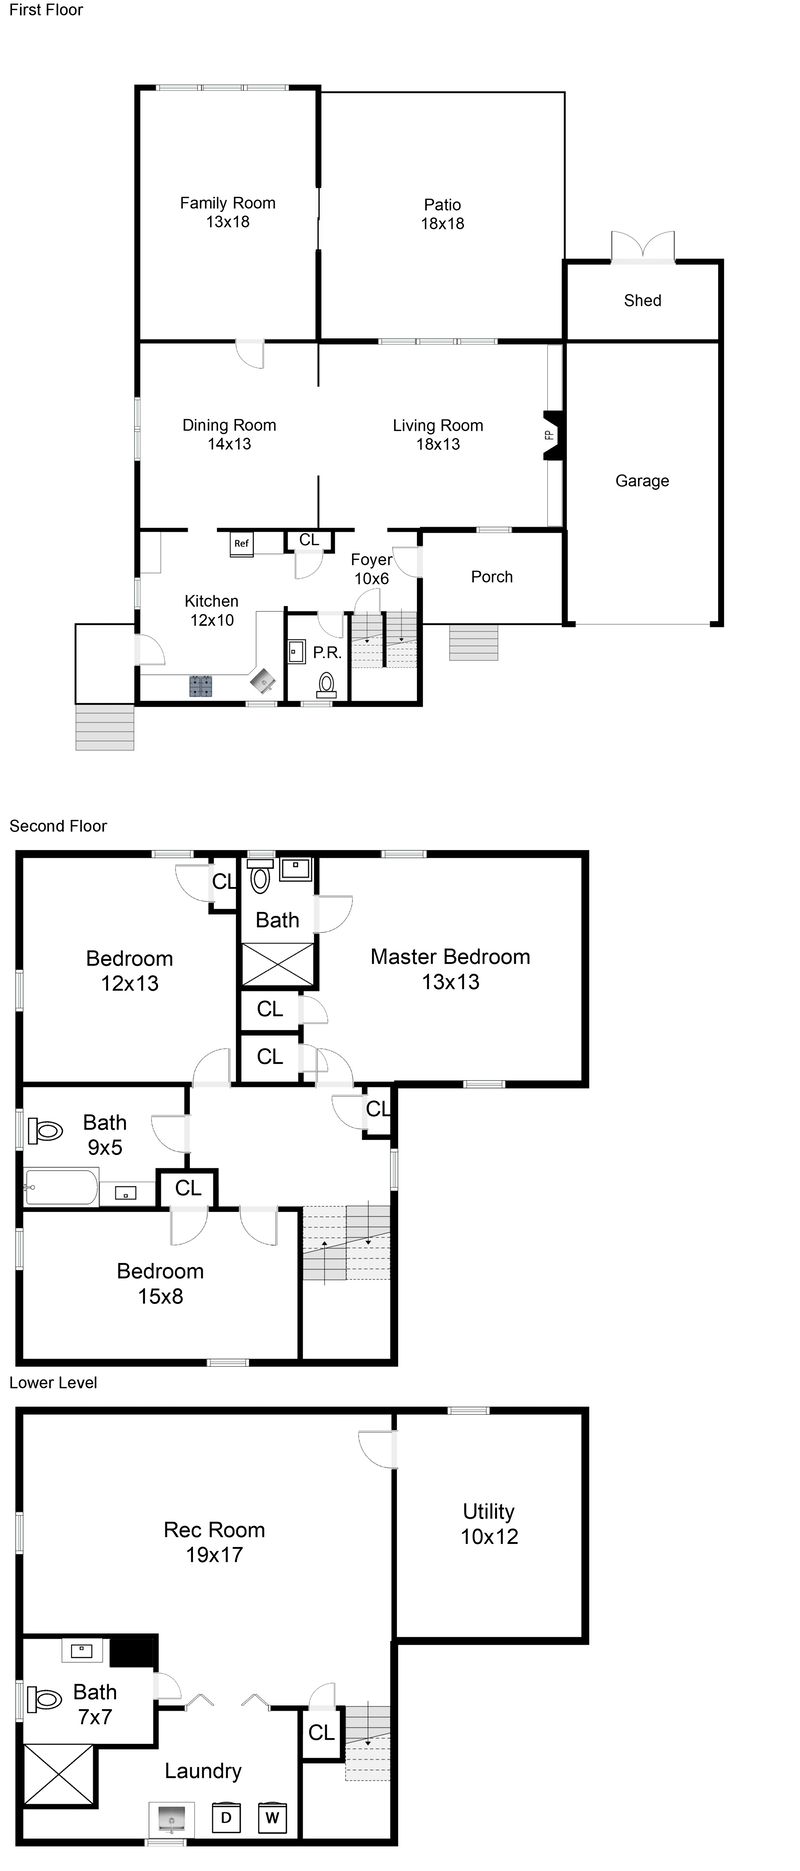 Floorplan for 132 Squire Hill Road